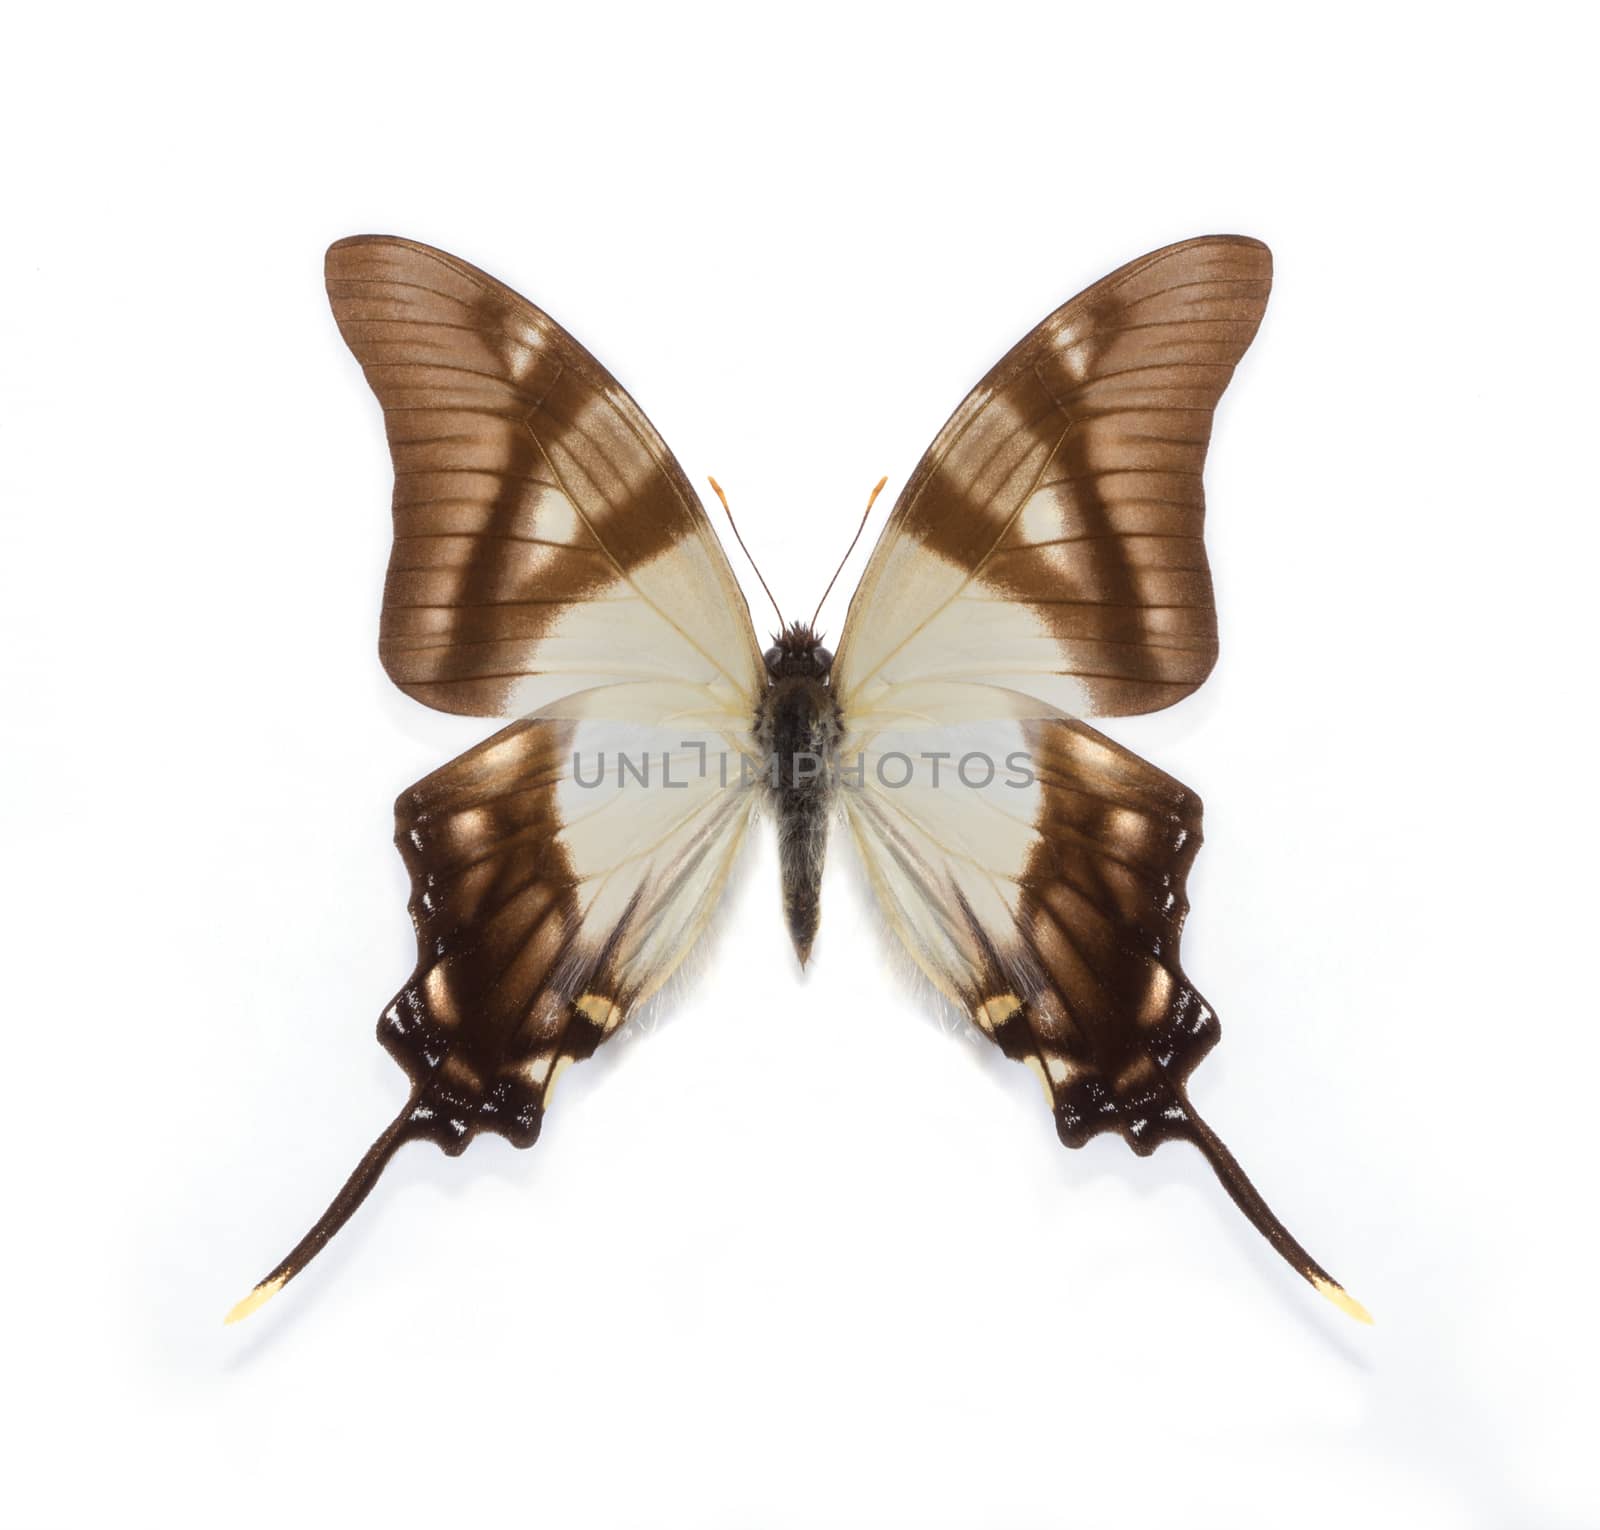 Eurytides serville butterfly by Olvita